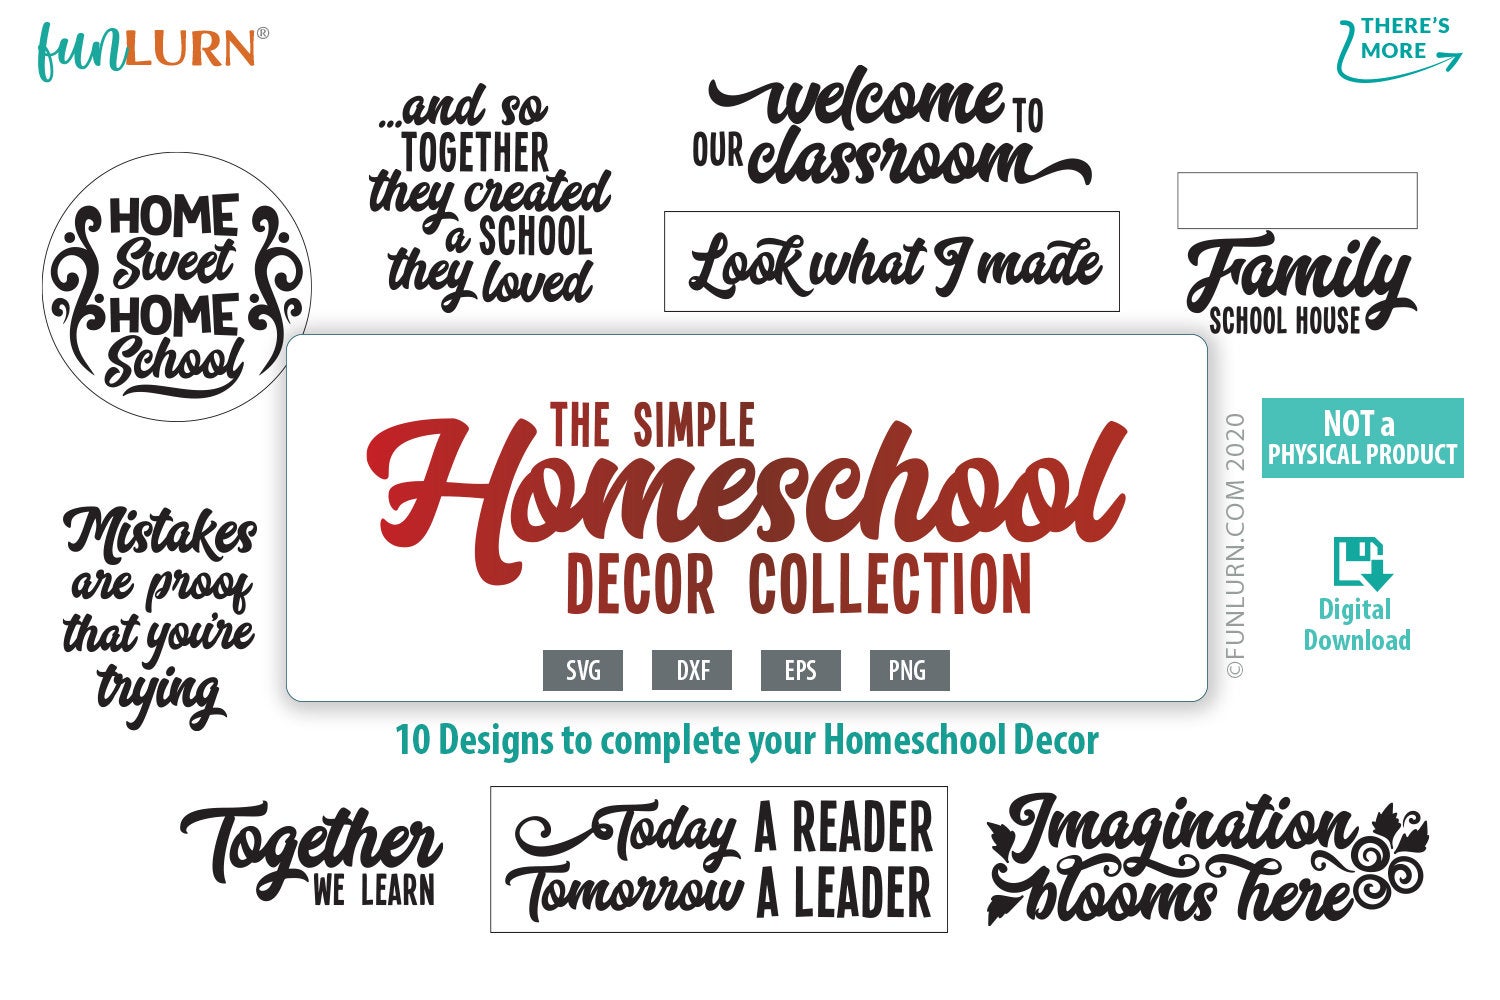 home sweet homeschool Imagination blooms here svg today a reader tomorrow a leader Welcome to our classroom Homeschool Decor svg bundle